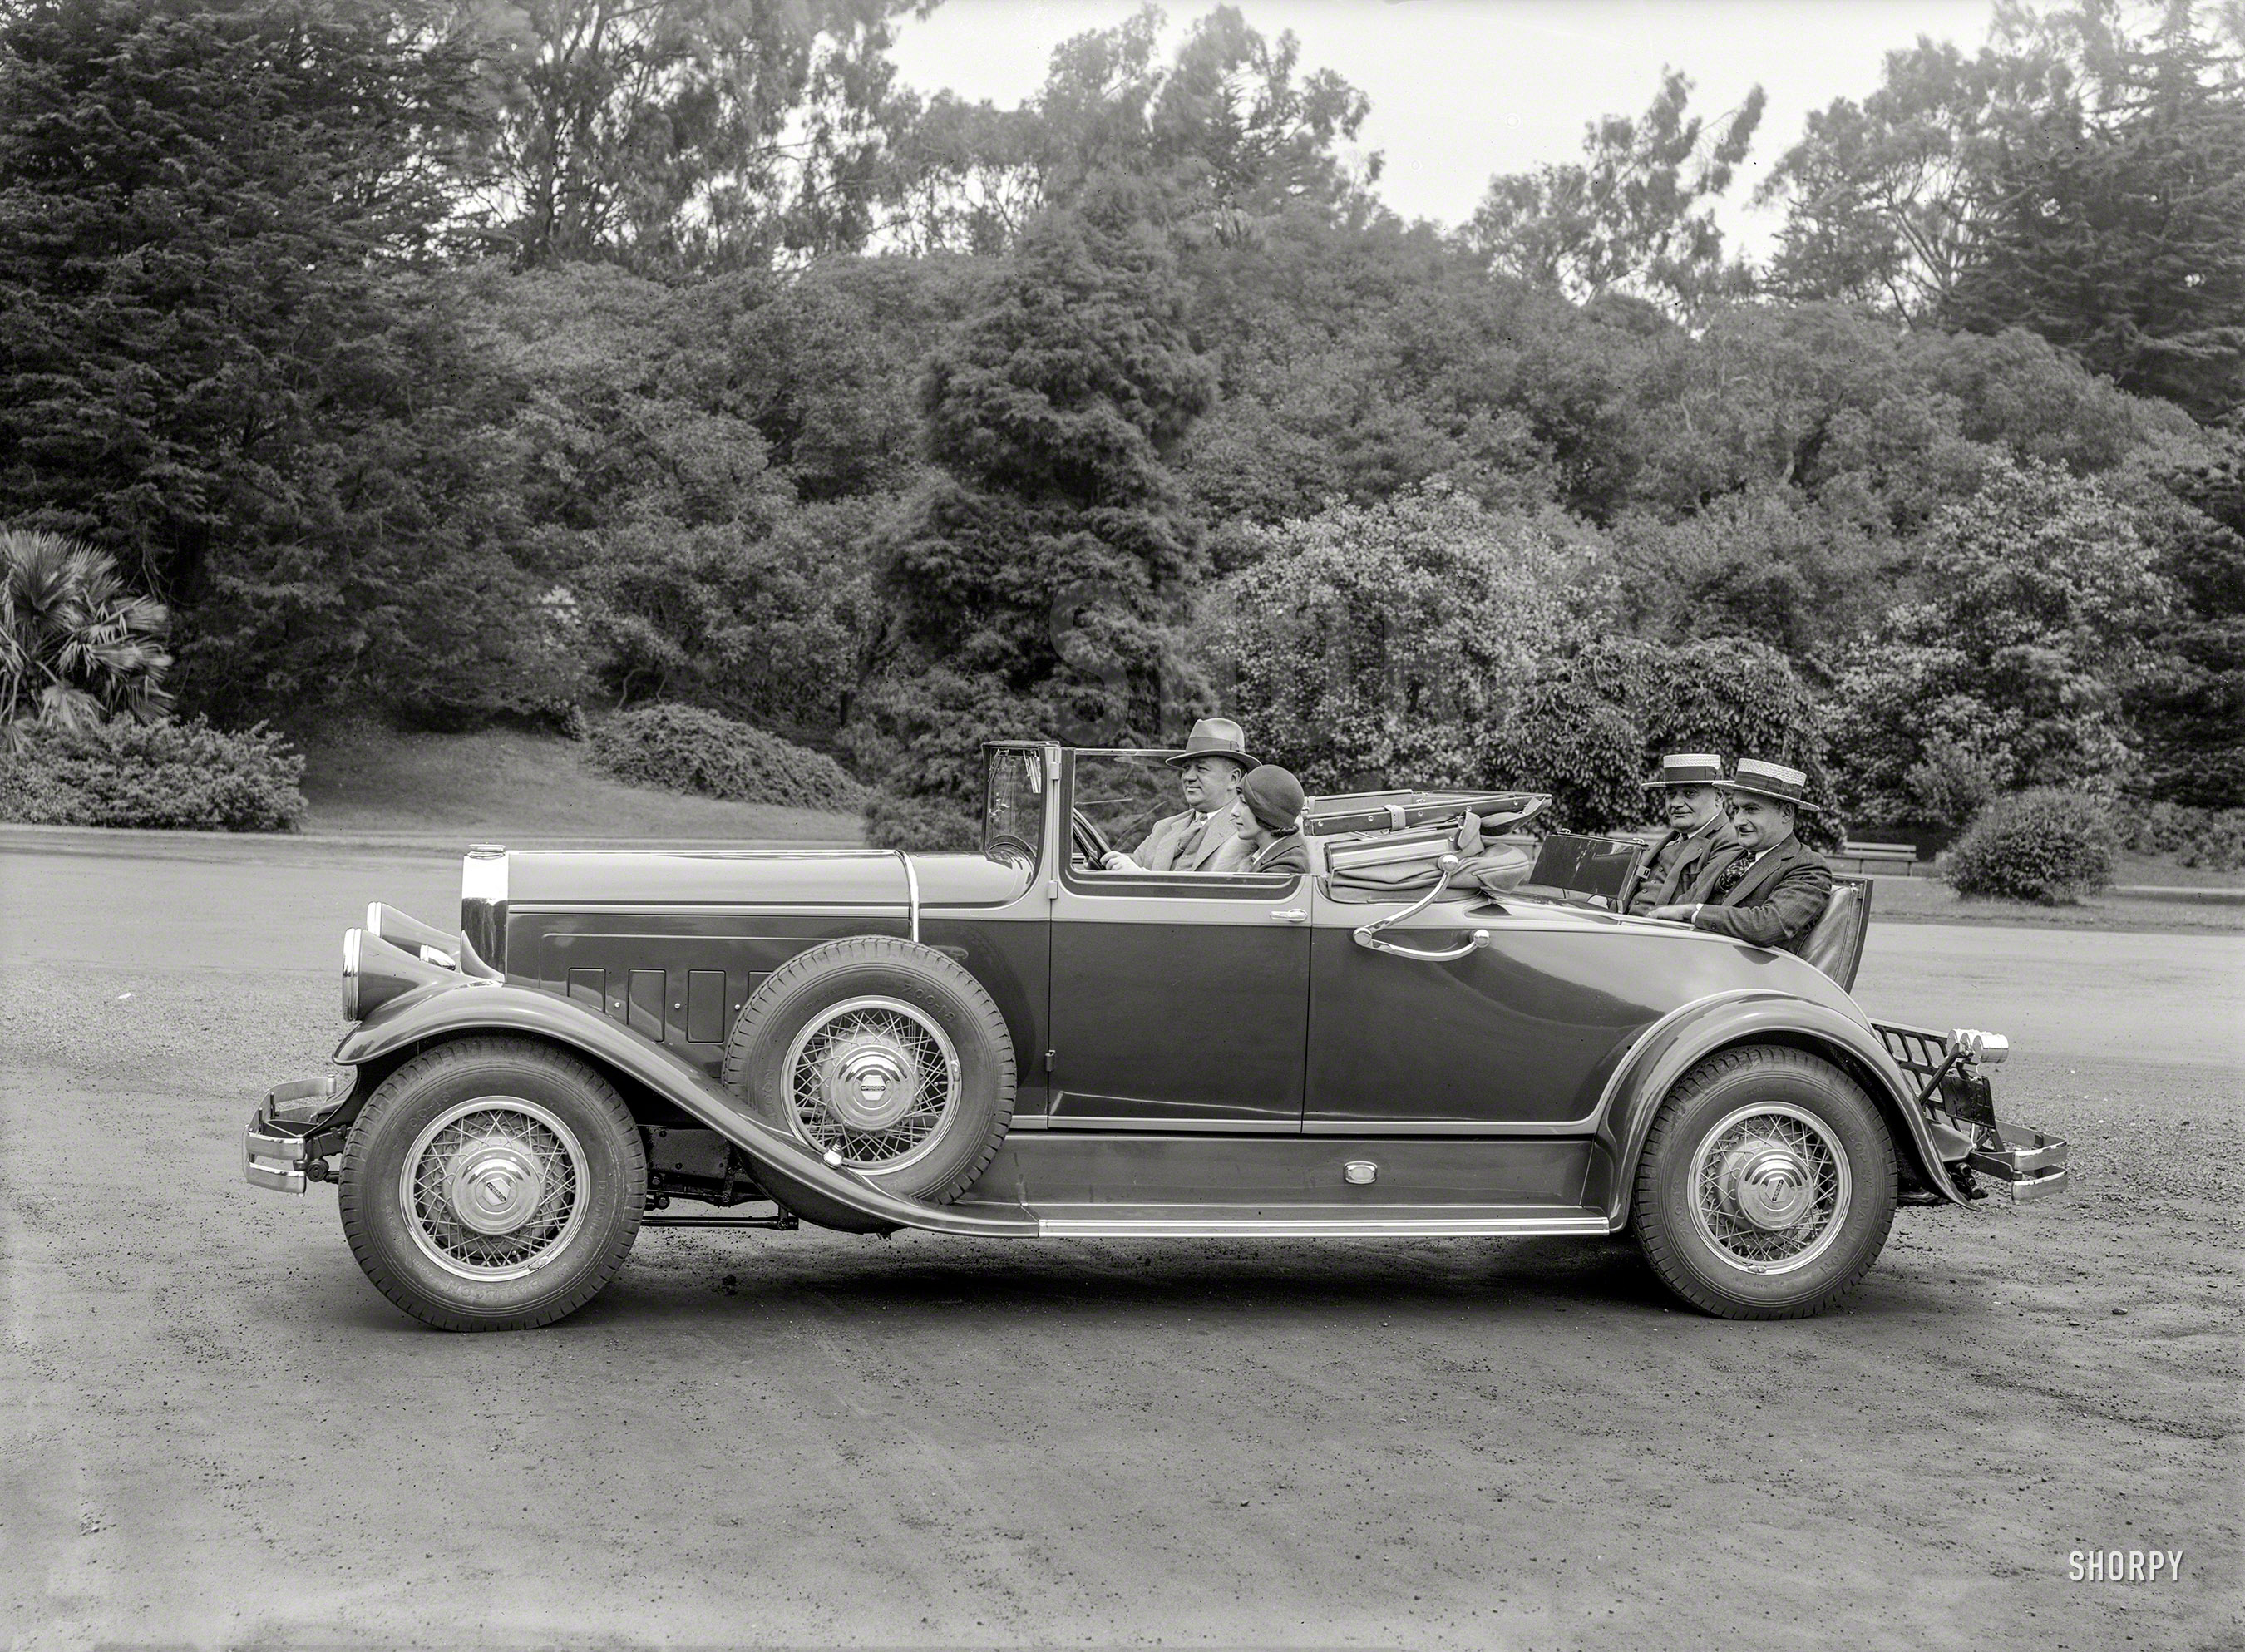 San Francisco, 1929. "Pierce-Arrow convertible coupe in Golden Gate Park." Ready to rumble. 5x7 glass negative by Christopher Helin. View full size.